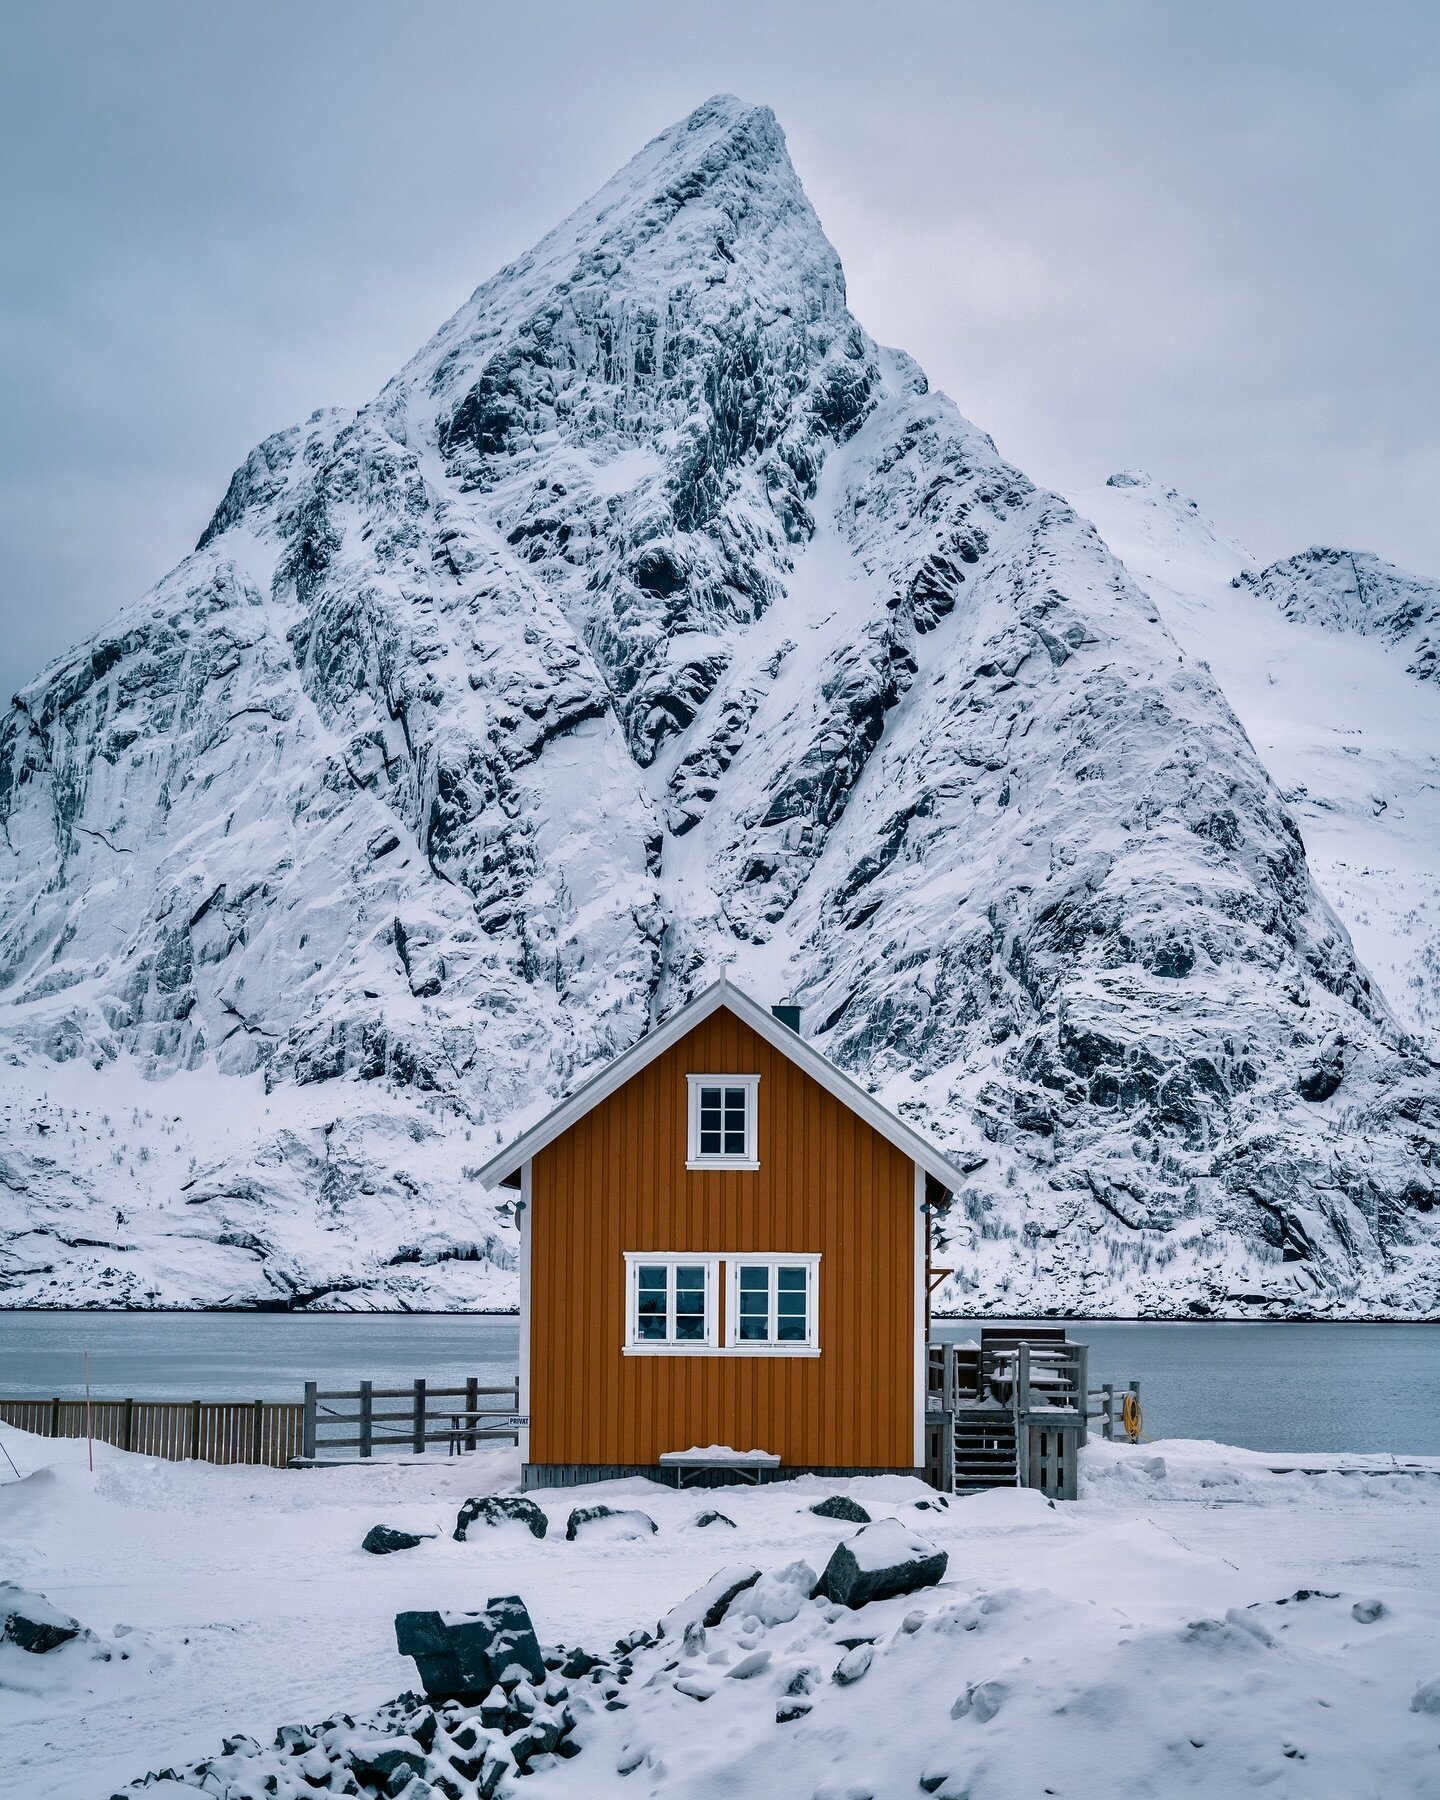 Let&rsquo;s start the Lofoten series with an absolute classic, a yellow hut in front of a snow covered mountain. 
The area around Reine is extremely popular with photographers and for a good reason. Behind every corner a new scene unfolds, one more s